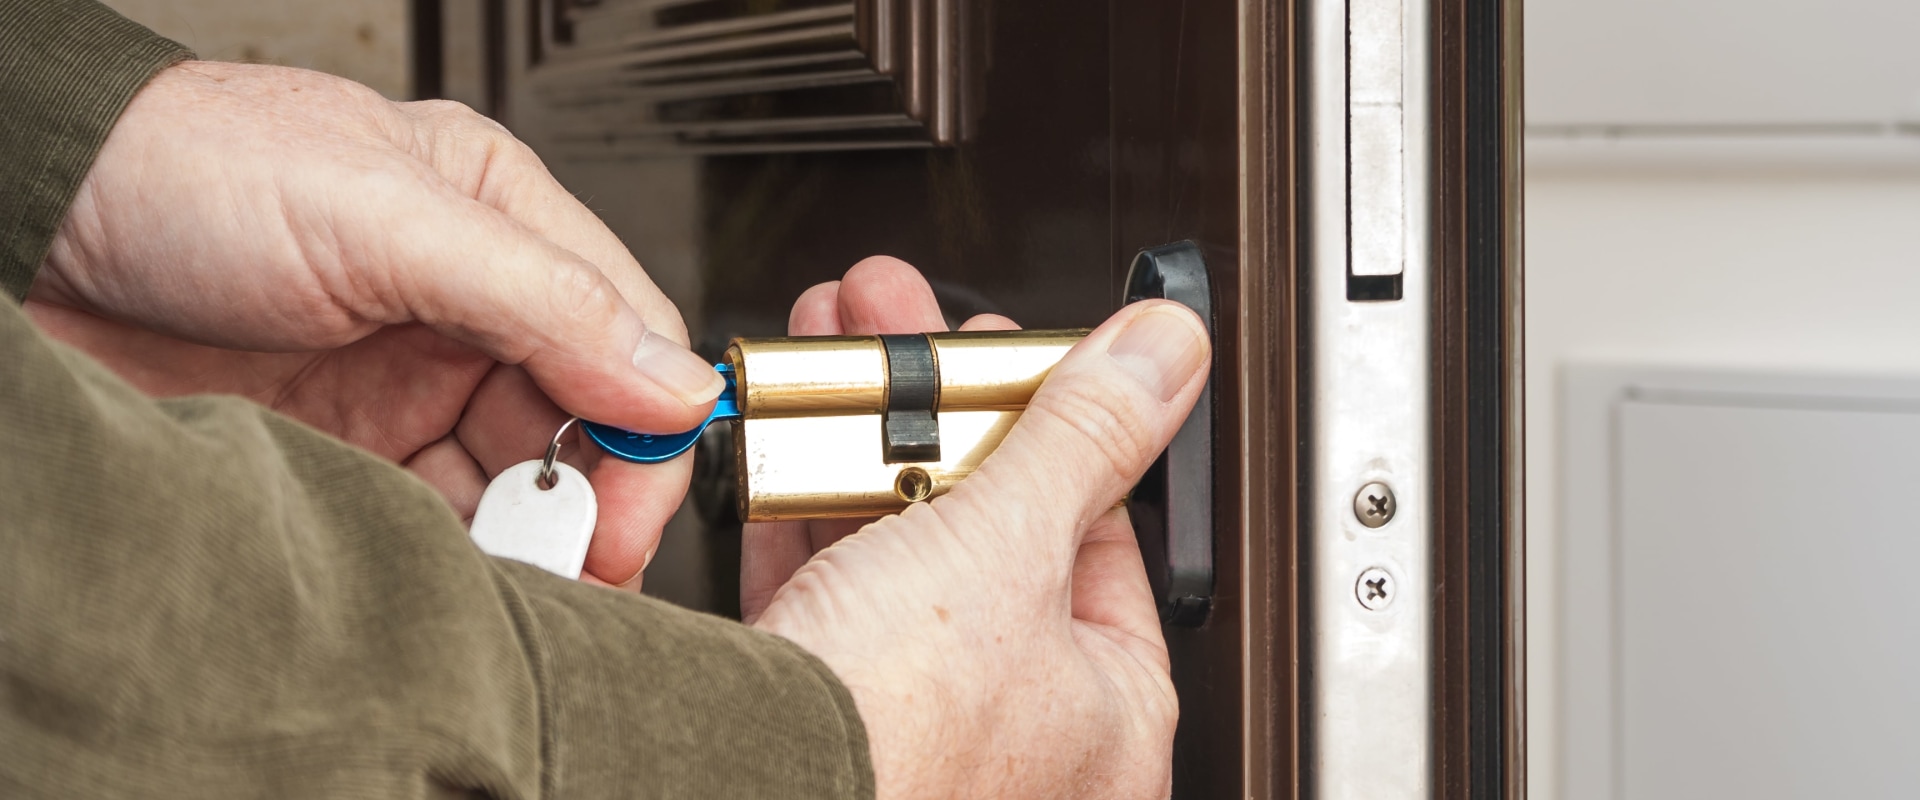 How Do Professional Locksmiths Get Into Homes?